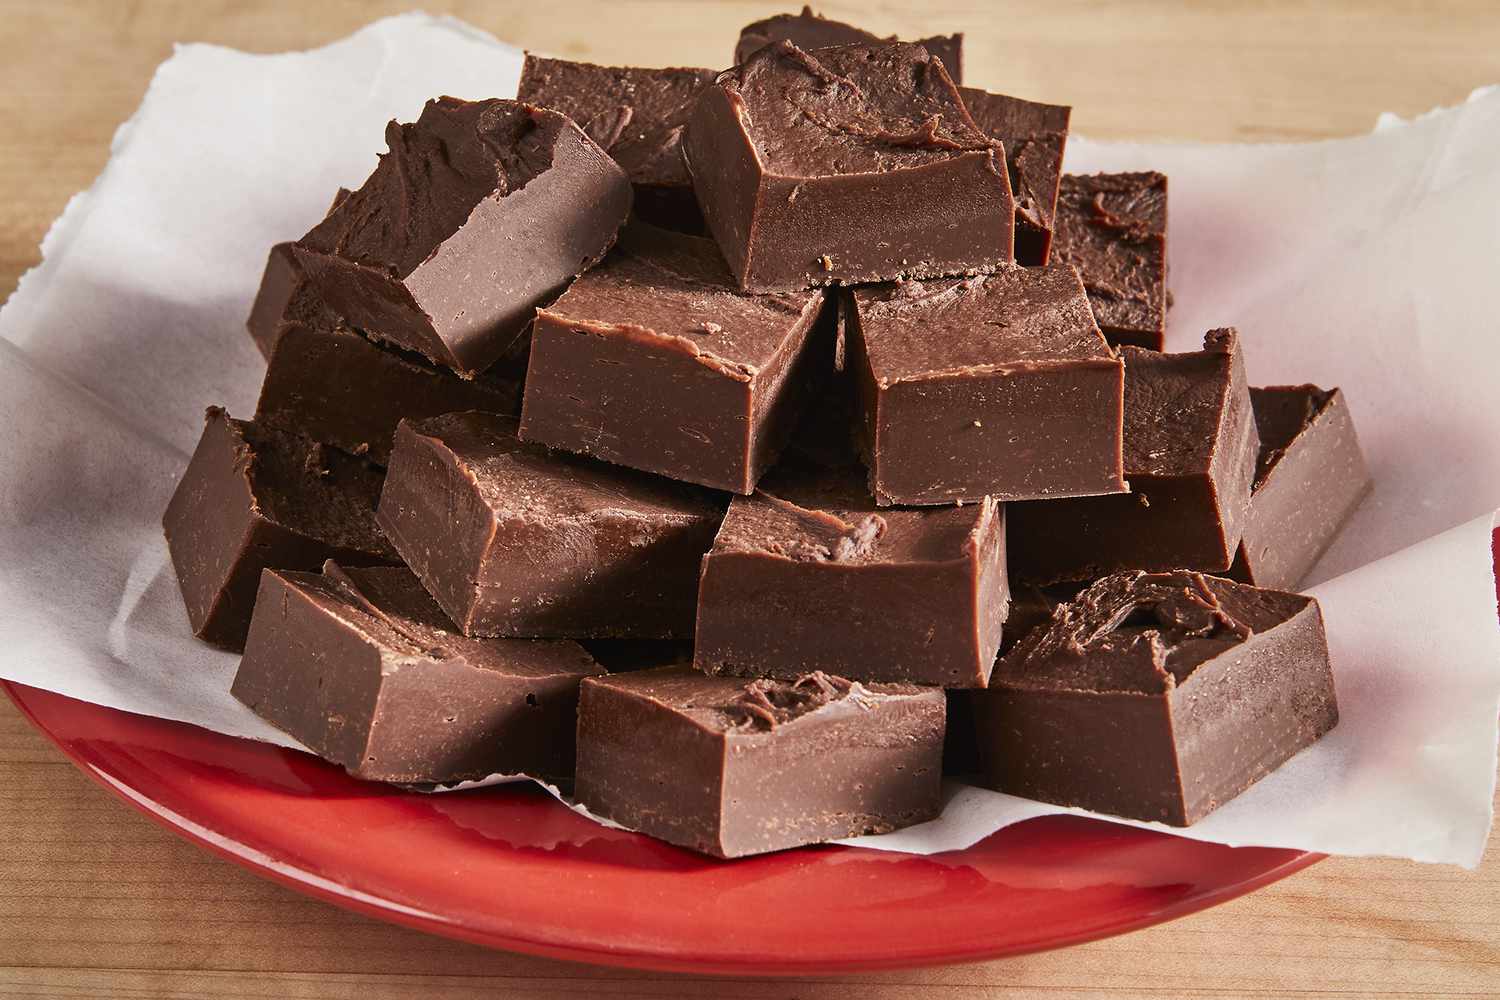 A low angle view of a big pile of chocolate fudge on a red plate